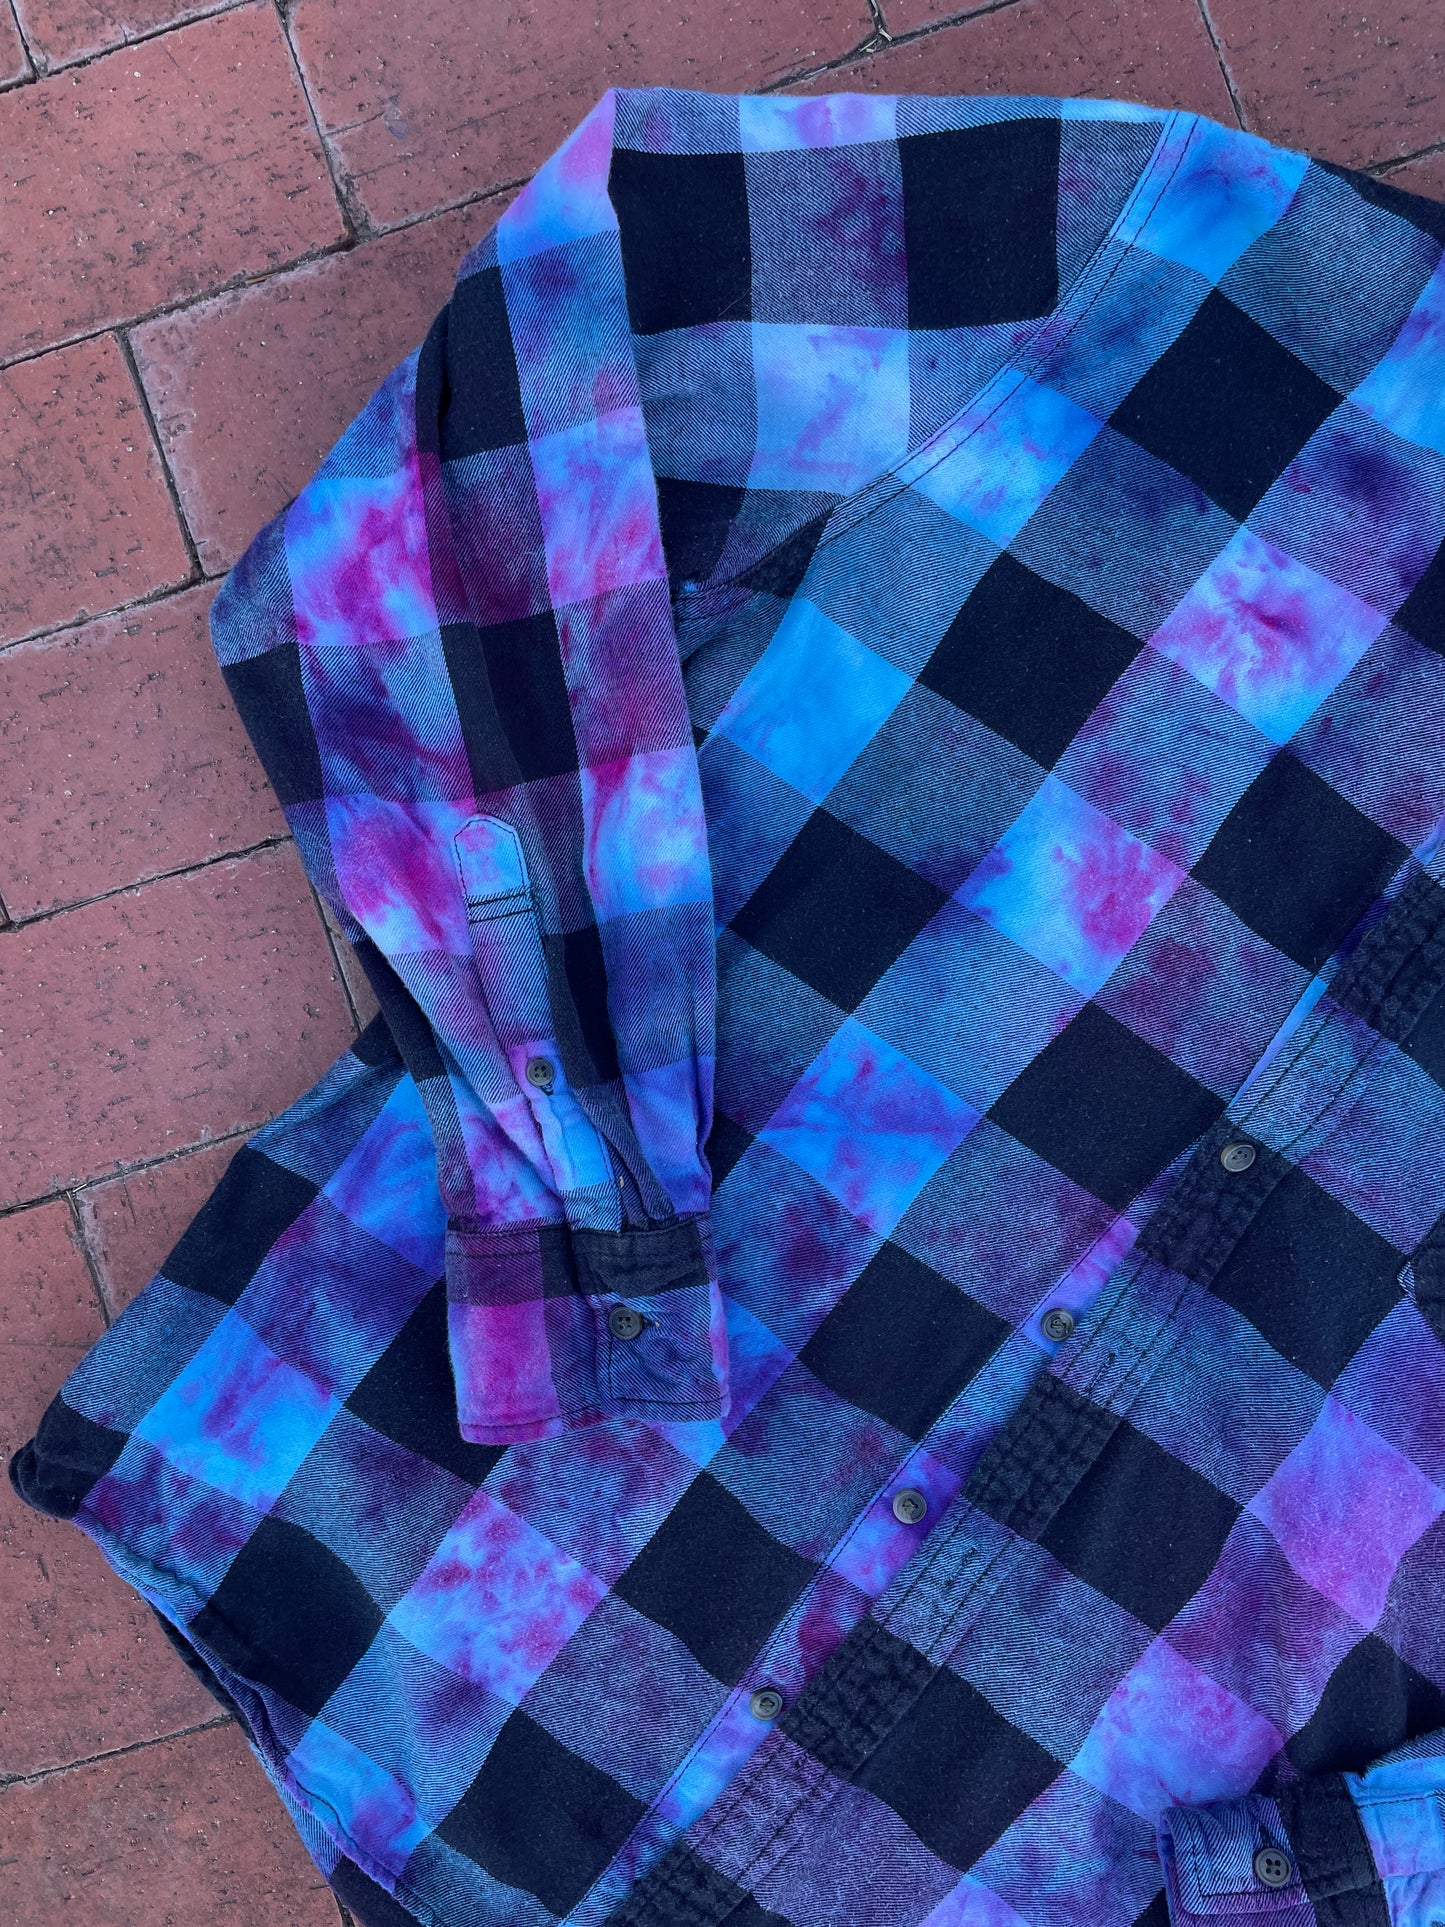 LARGE Women’s Galaxy Buffalo Plaid Handmade Tie Dye Flannel Shirt | One-Of-a-Kind Upcycled Blue and Purple Long Sleeve